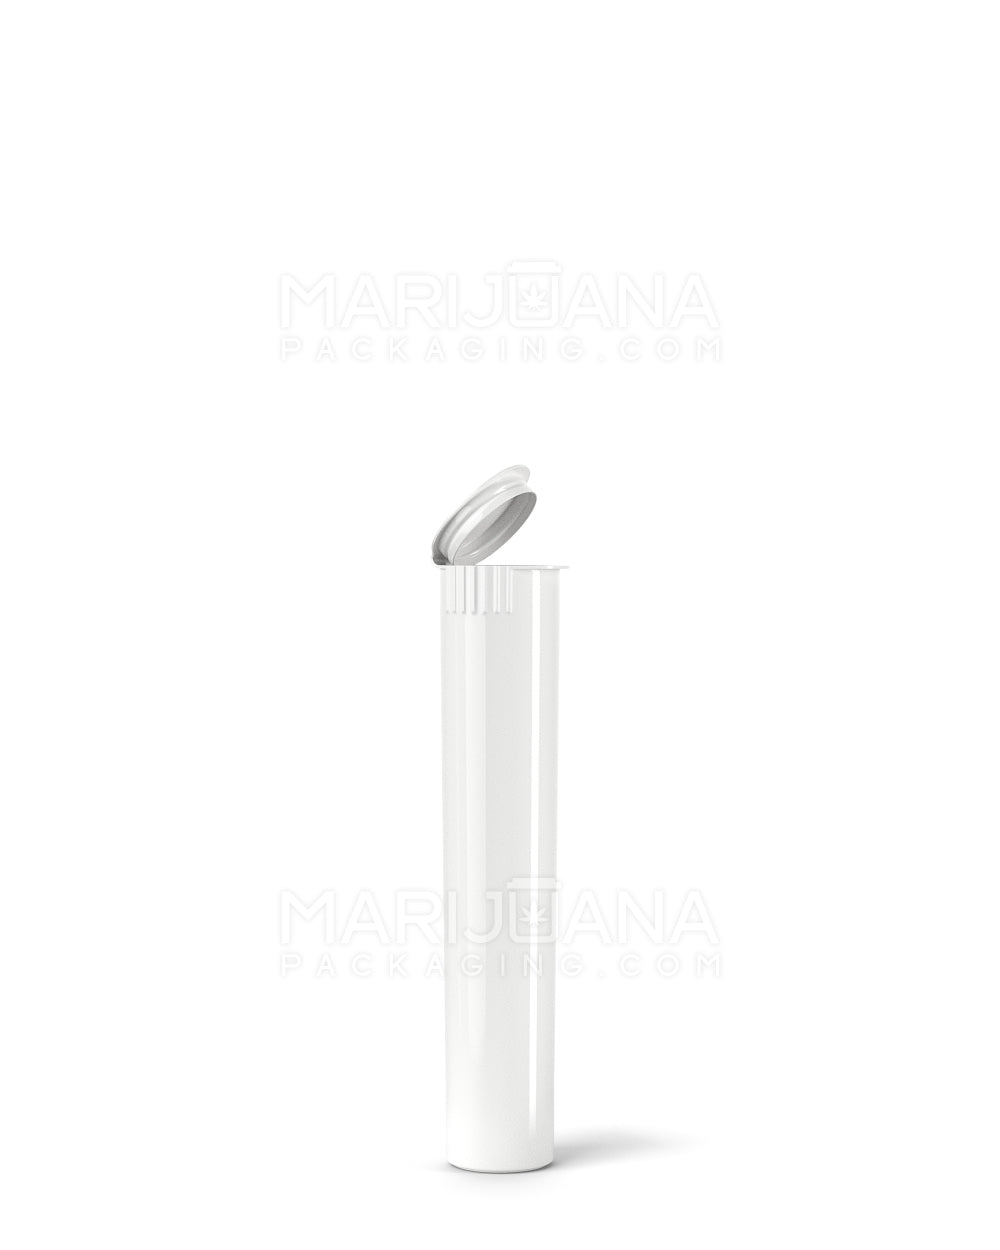 70mm Child Resistant Opaque White Plastic Pre-Roll Tubes